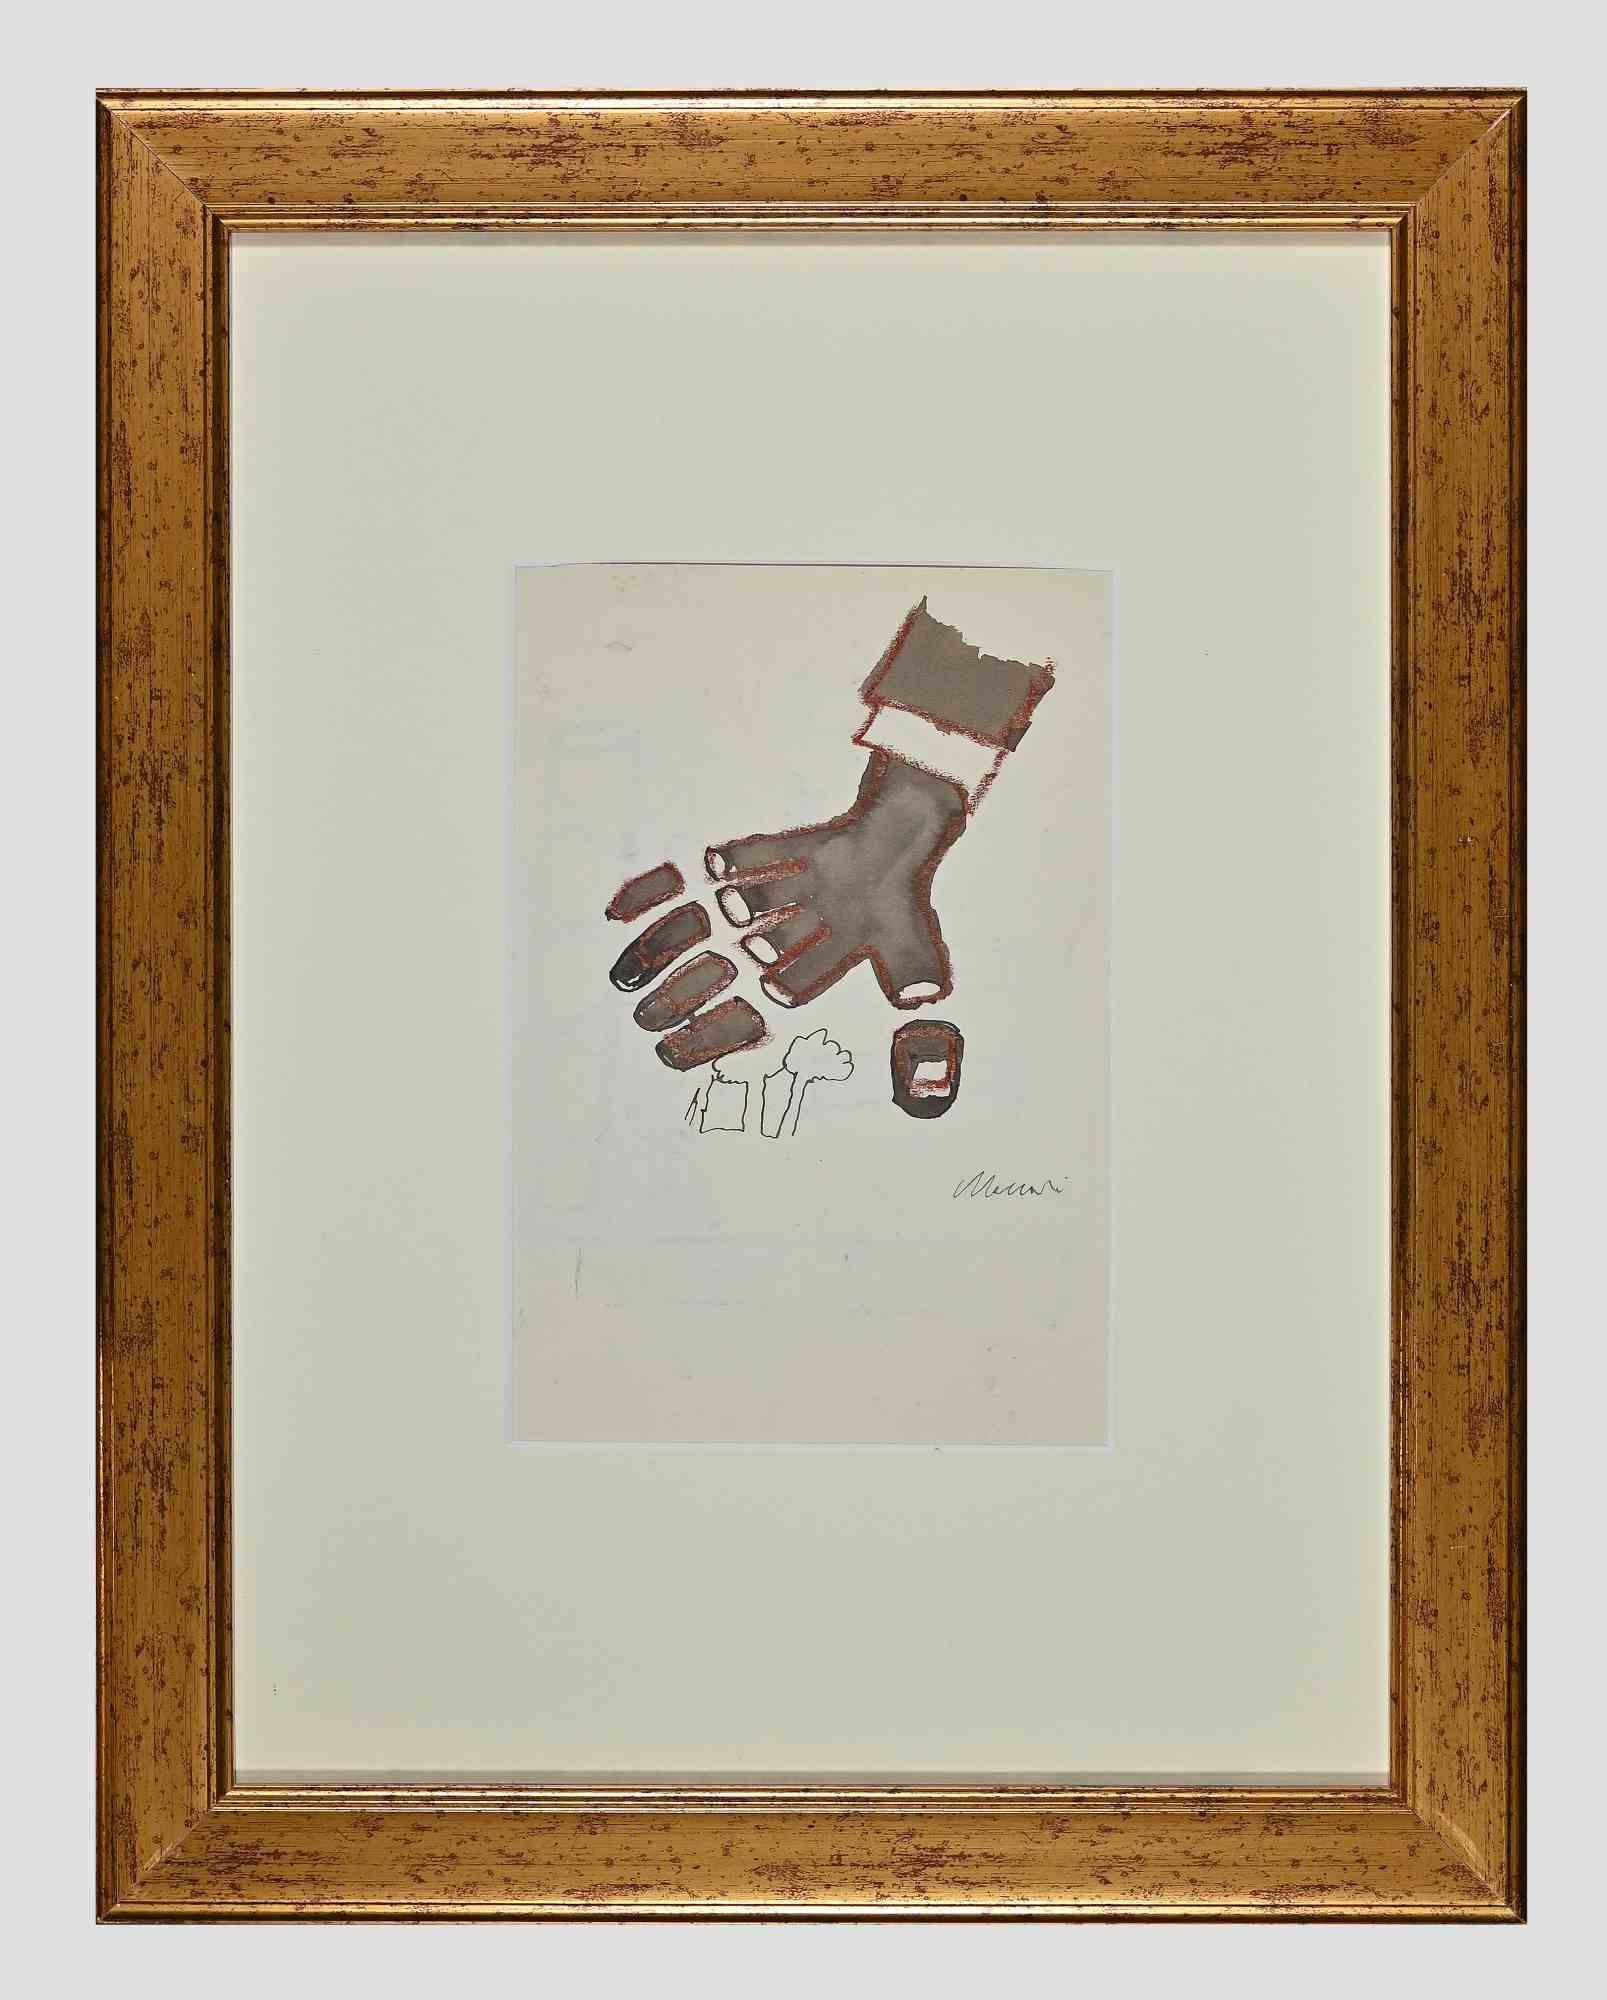 Hand is an original artwork realized in the half of mid-20th Century by Mino Maccari.

Mixed media artwork (ink, oil pastel and watercolor).

Hand signed by the artist on the lower margin.

Includes gilded frame.